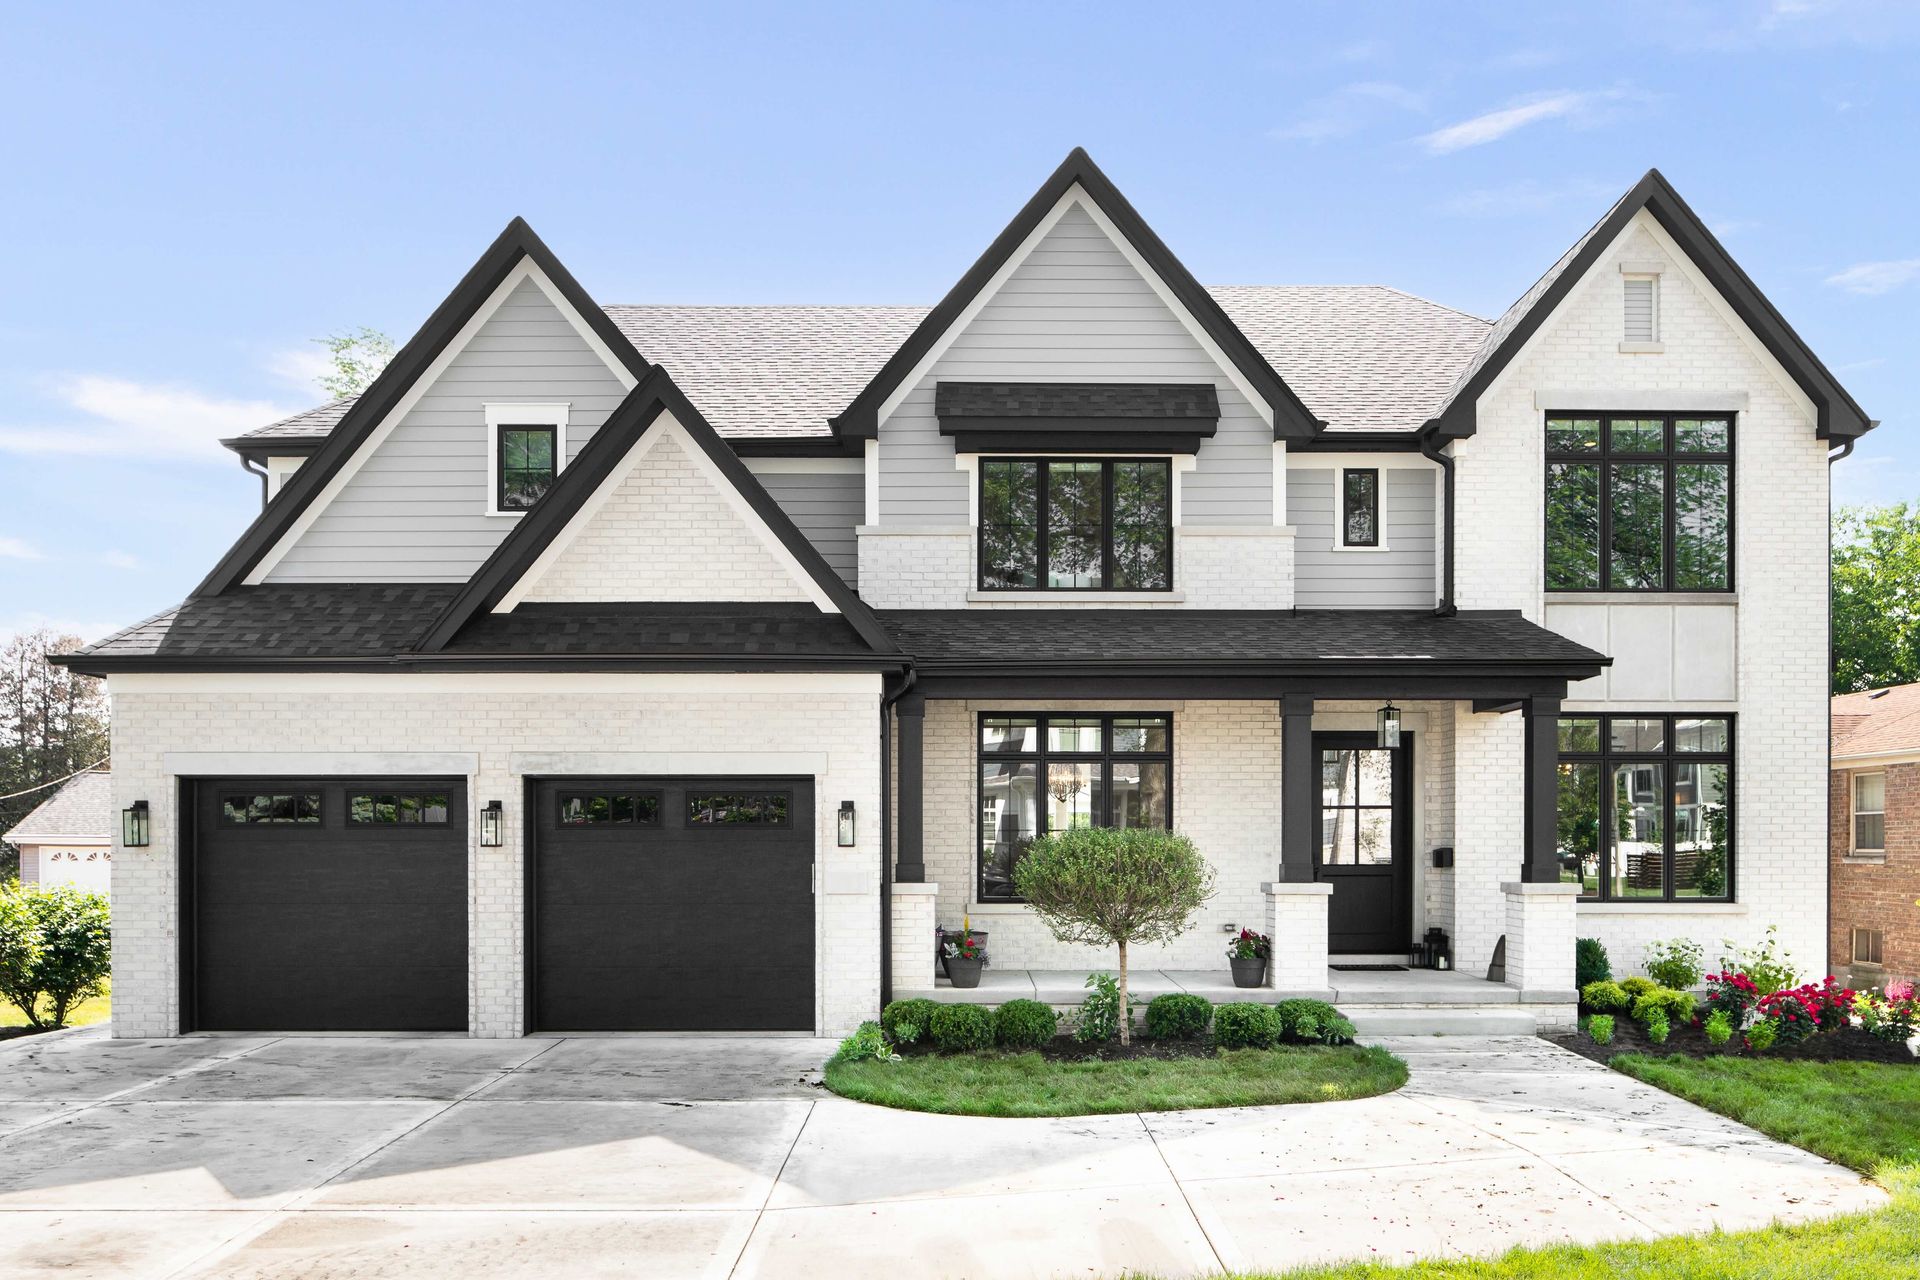 a large white house with black trim and black garage doors .